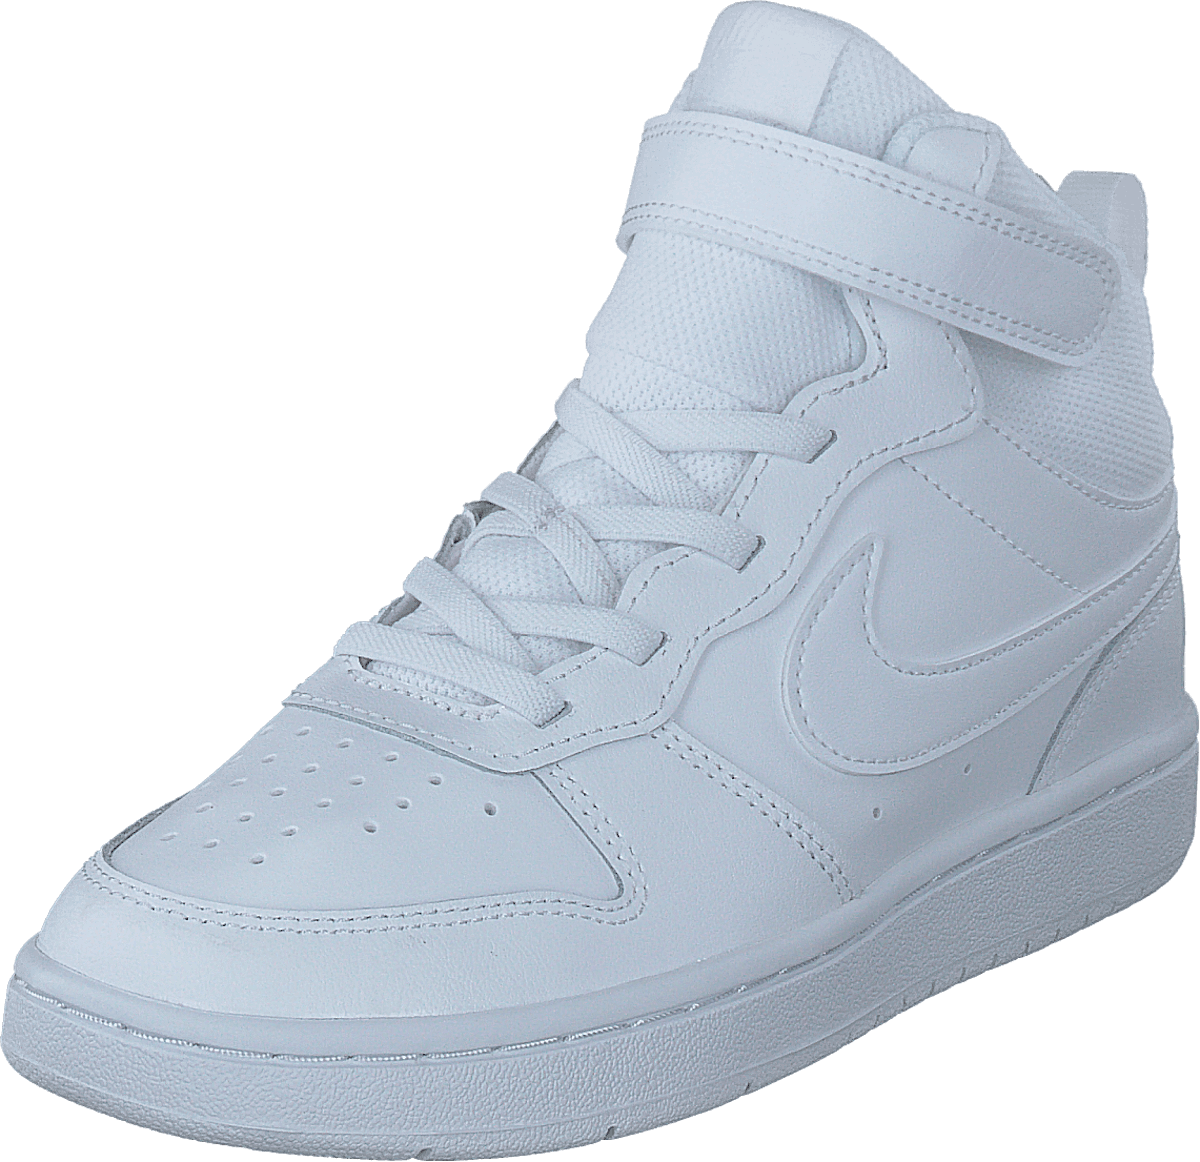 Court Borough Mid 2 Little Kids' Shoes WHITE/WHITE-WHITE | Shoes for ...